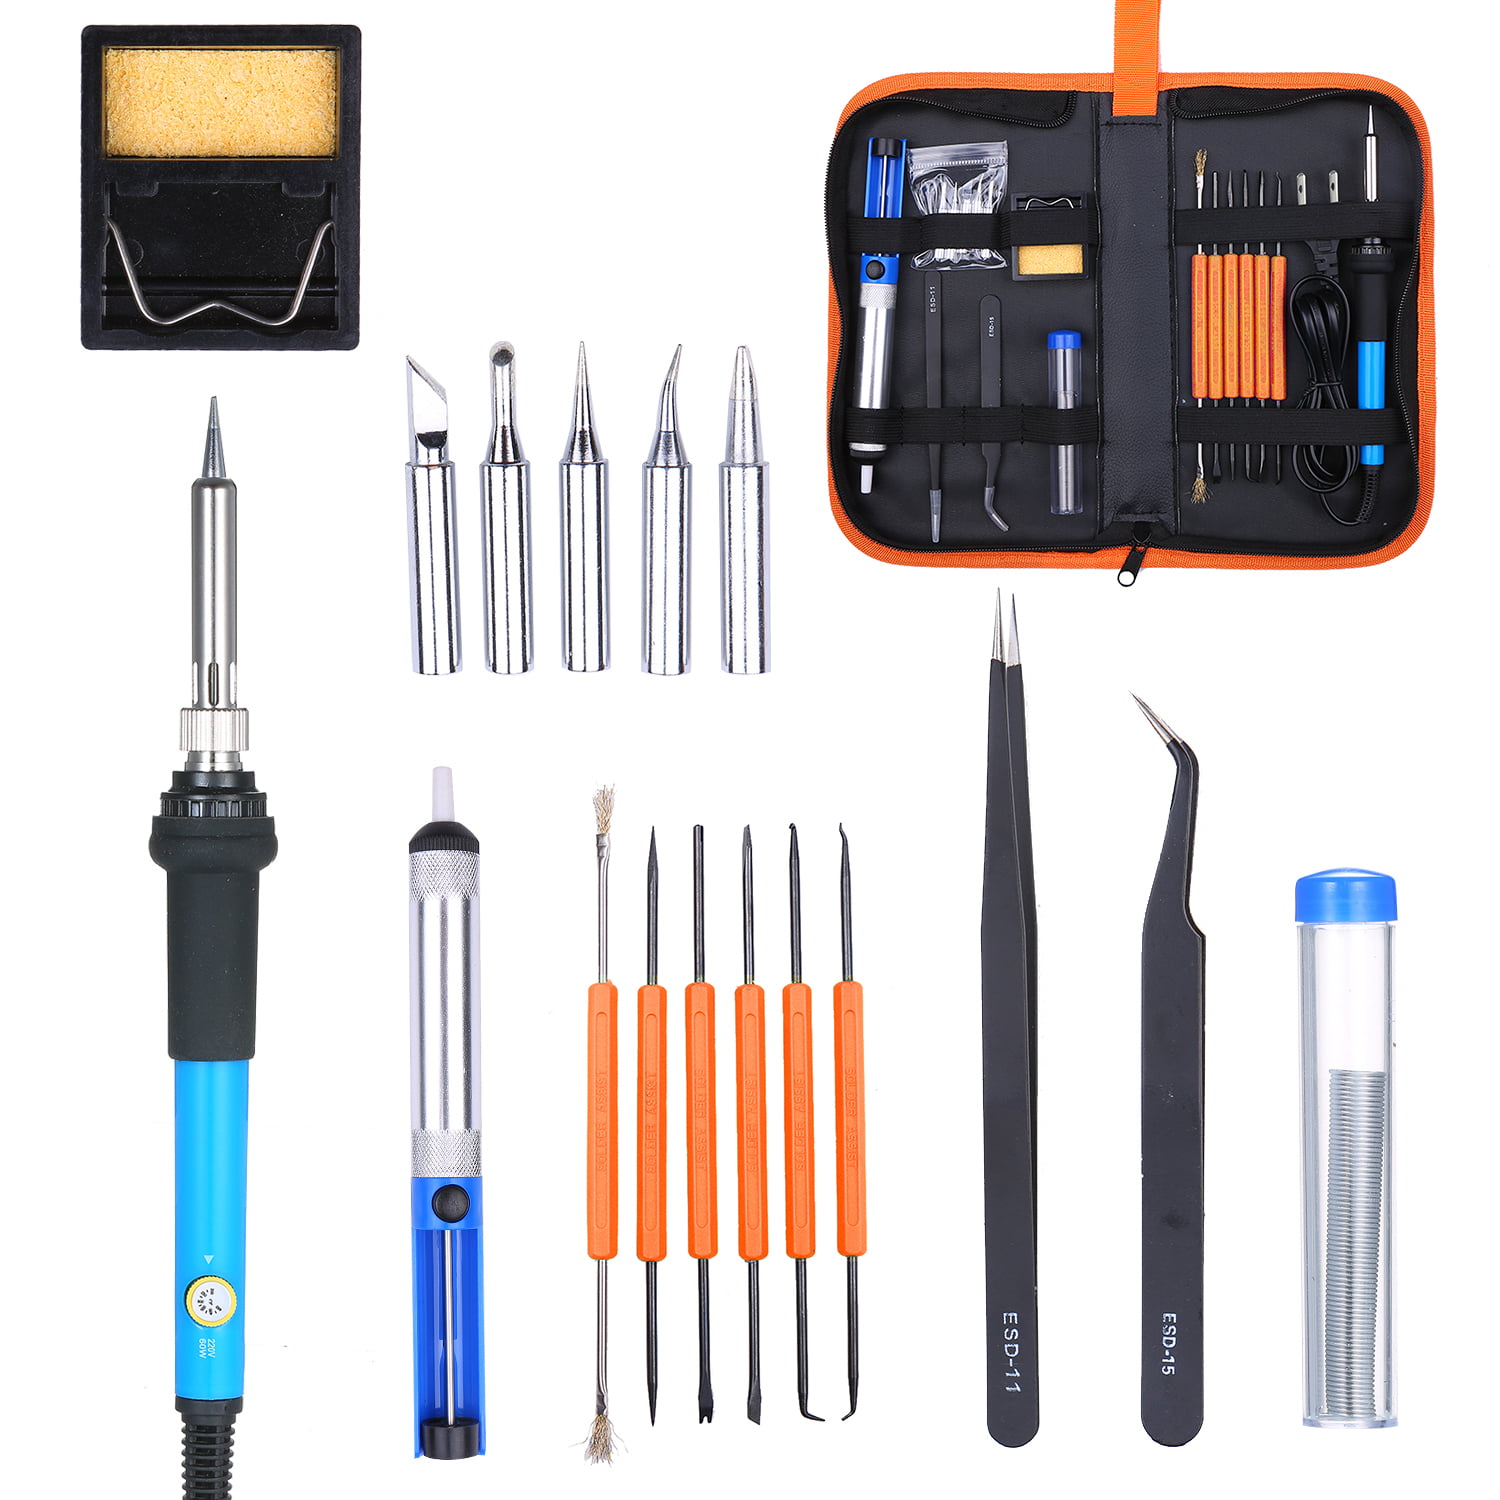 Soldering Iron Kit 24 pieces wowgo 60w Electric Welding Tin with 5 Tips Temp 